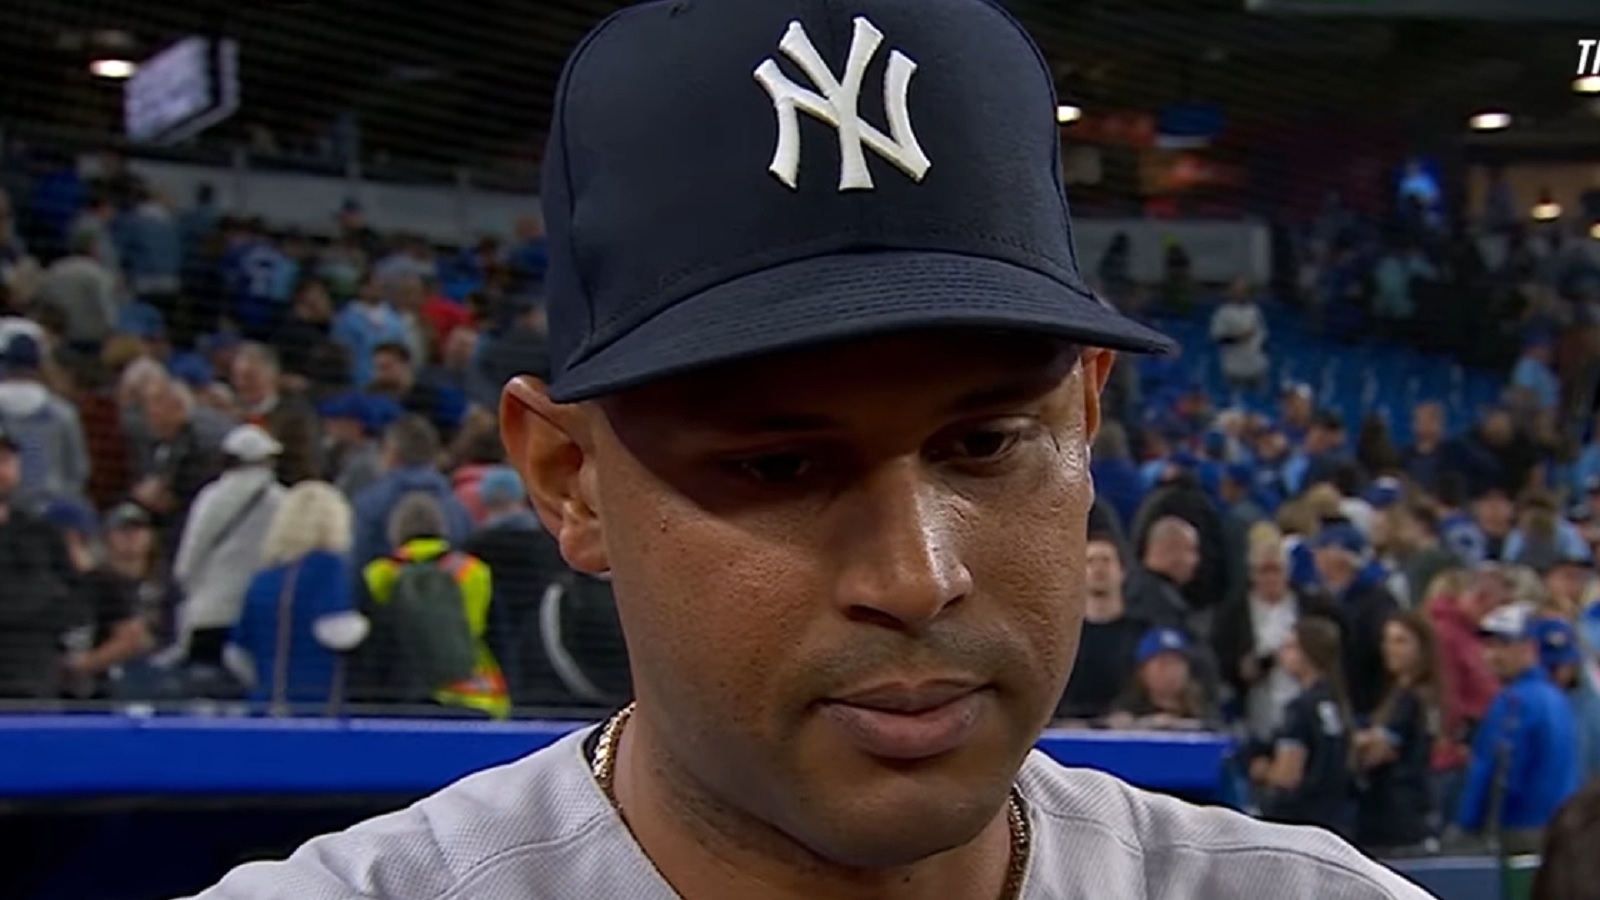 Aaron Hicks signs with new team after being cut by Yankees